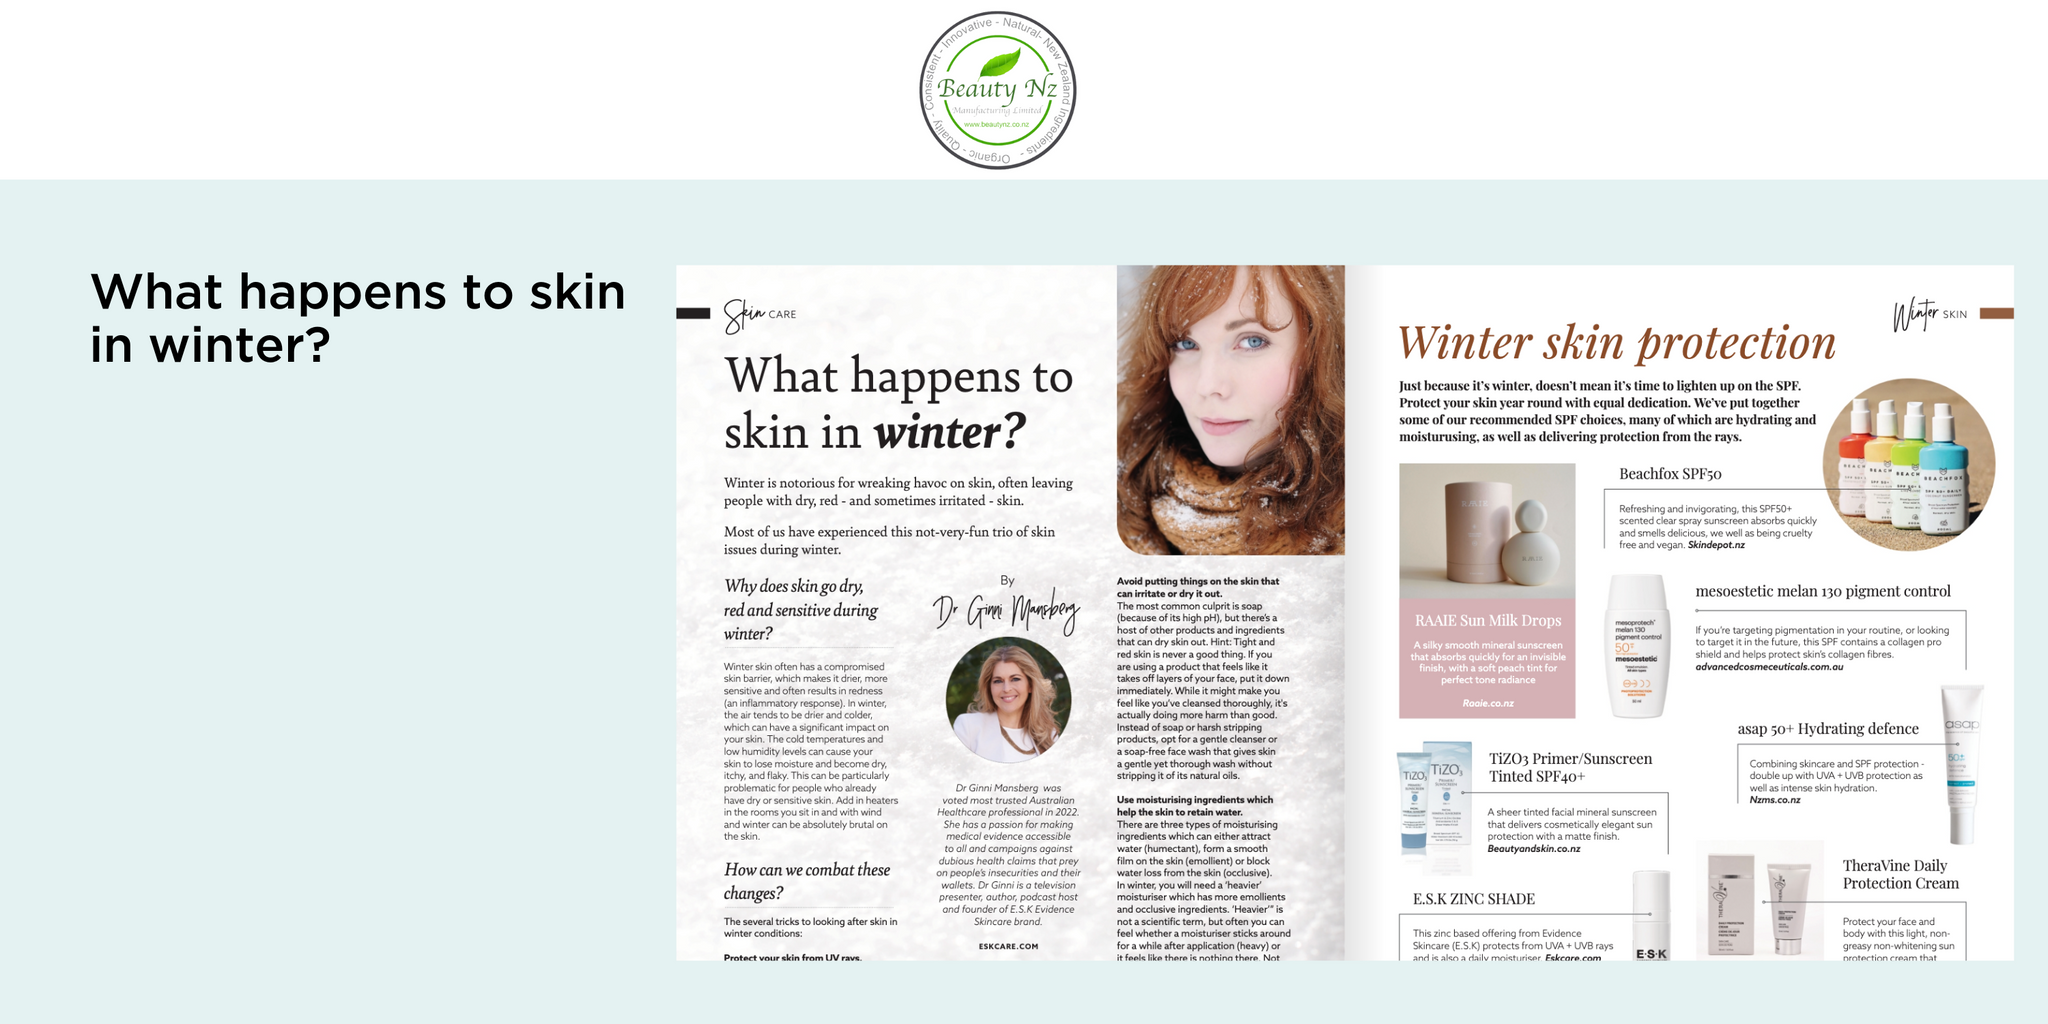 What happens to skin in winter?